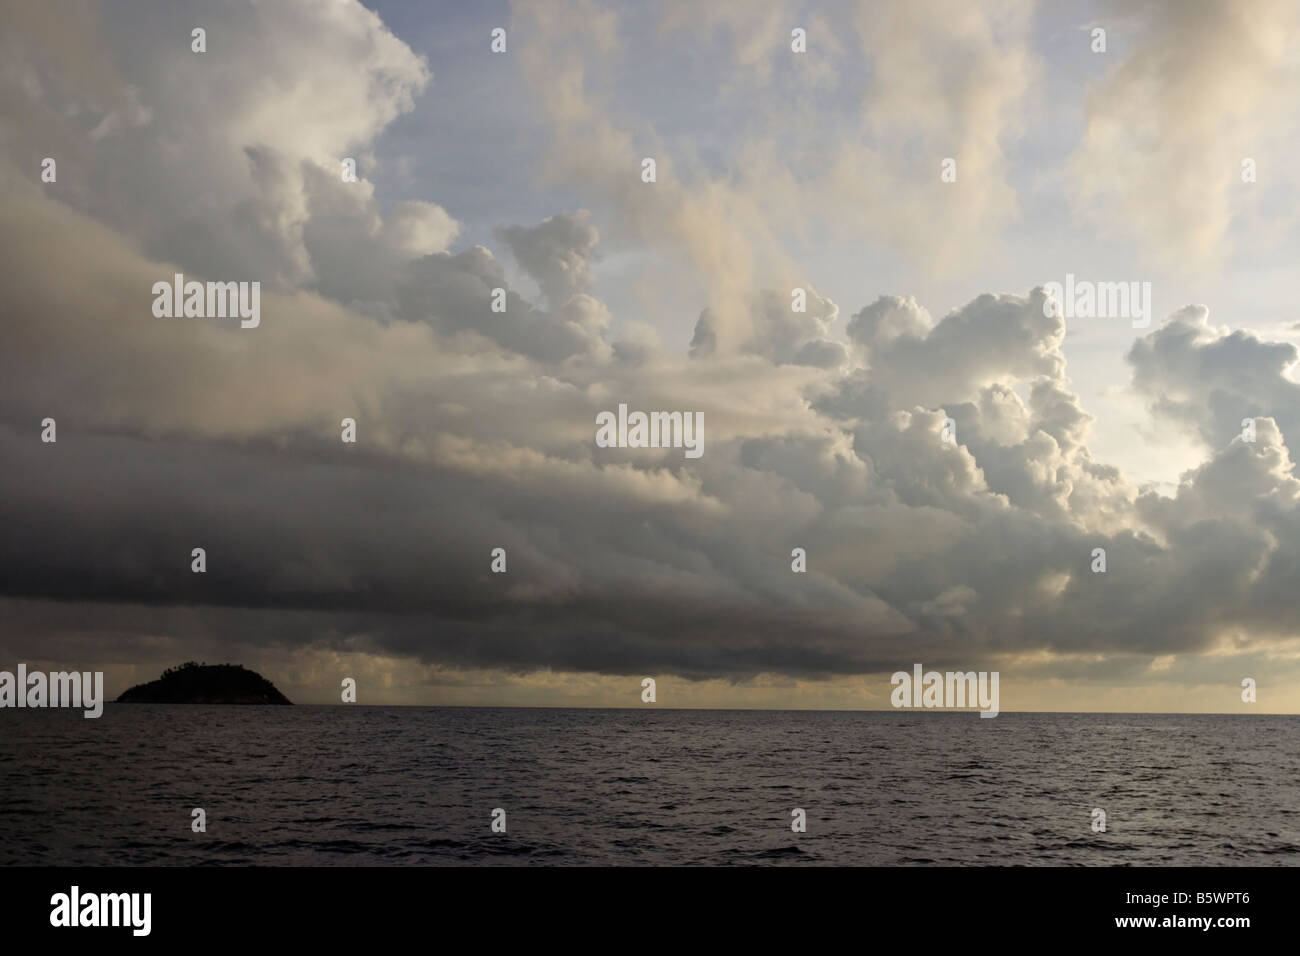 Low cloud formation over an island in Malaysia. Stock Photo